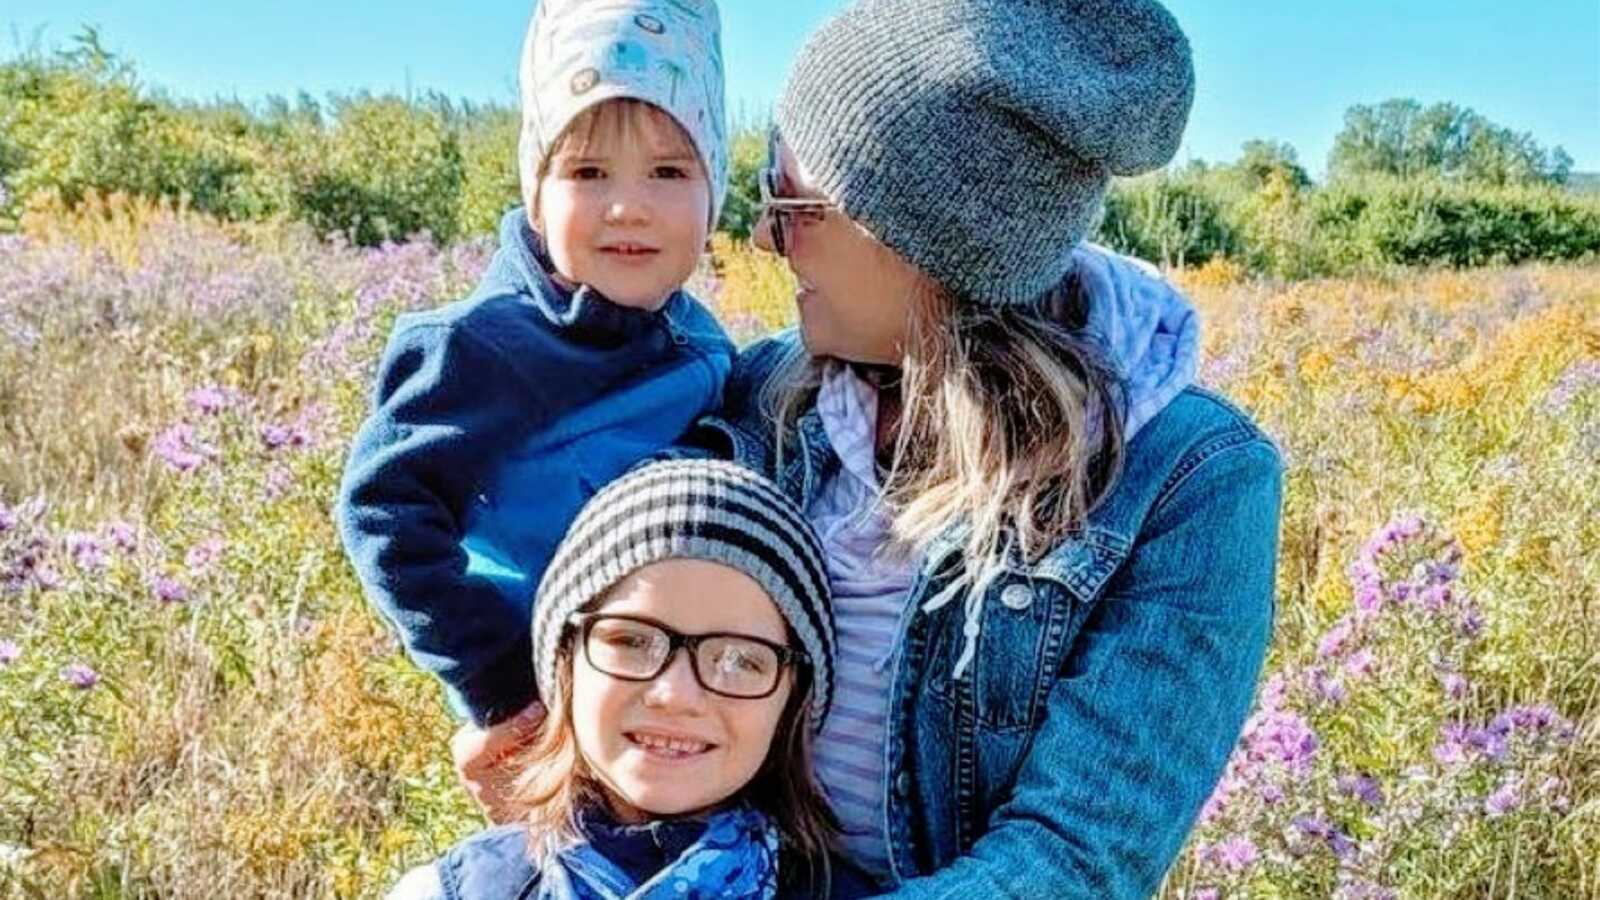 Mom takes a photo with her two sons in a field of flowers